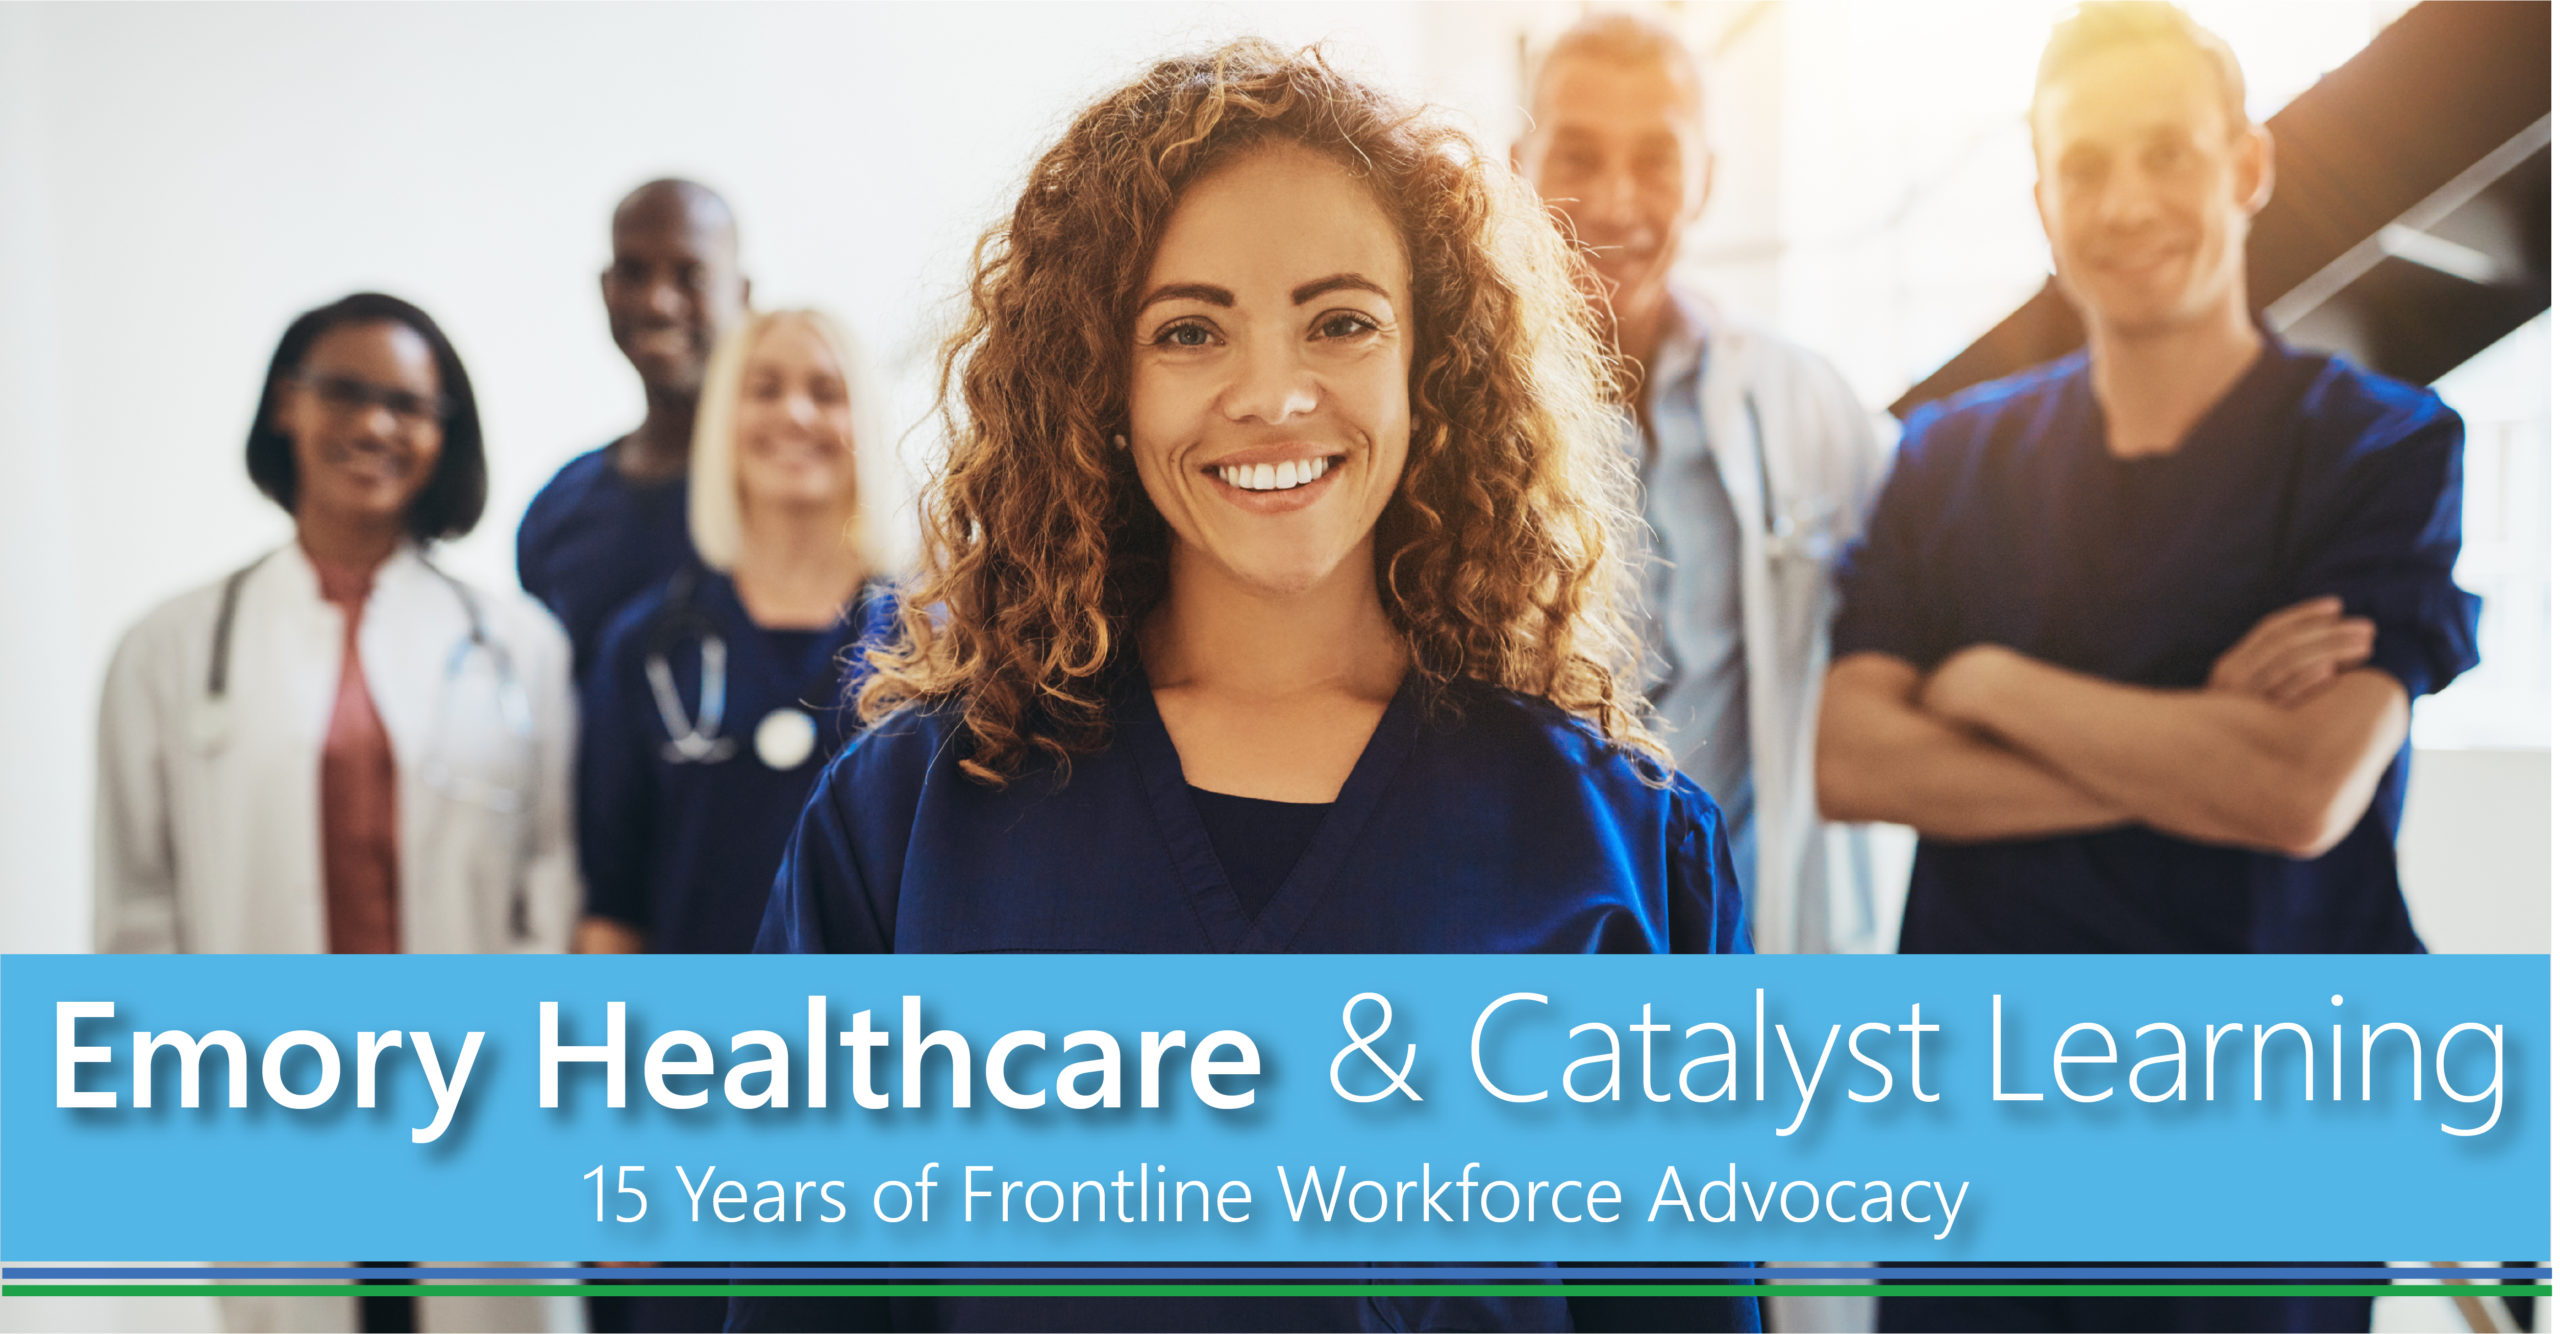 Emory Healthcare & Catalyst Learning – 15 Years of Frontline Workforce Advocacy